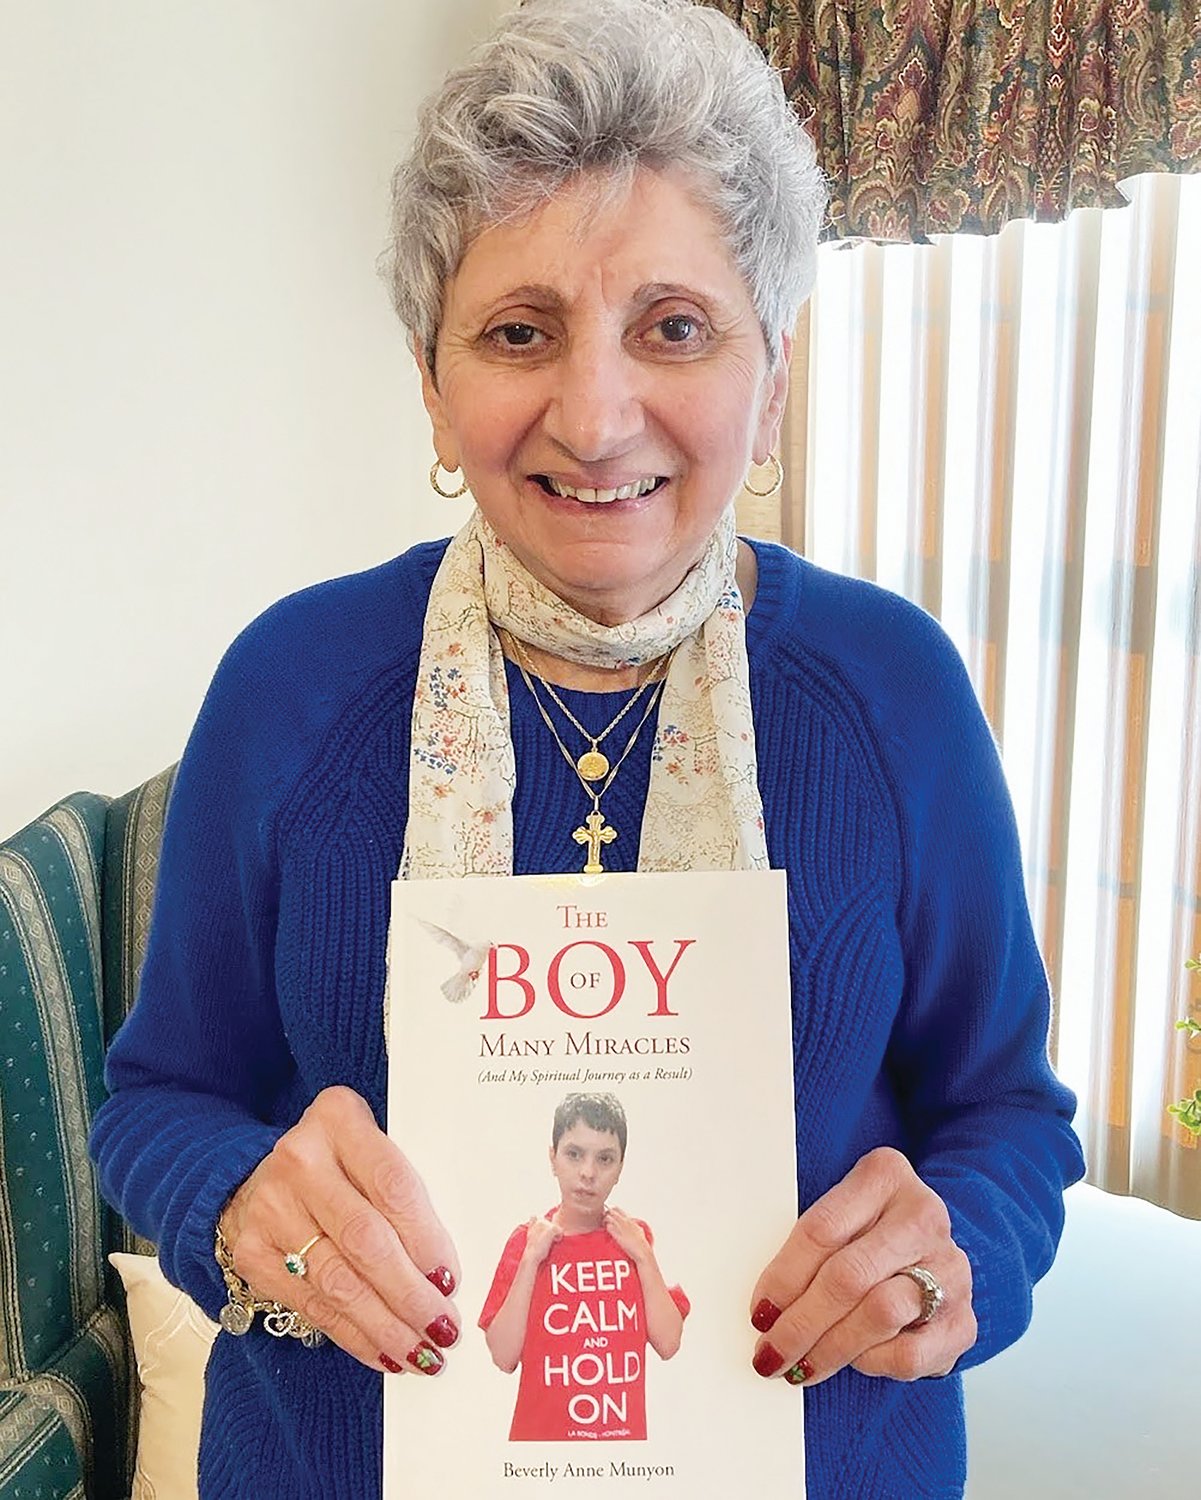 Our Lady of Good Help parishioner Beverly Munyon has written her first book “The Boy of Many Miracles” a memoir of her grandson.